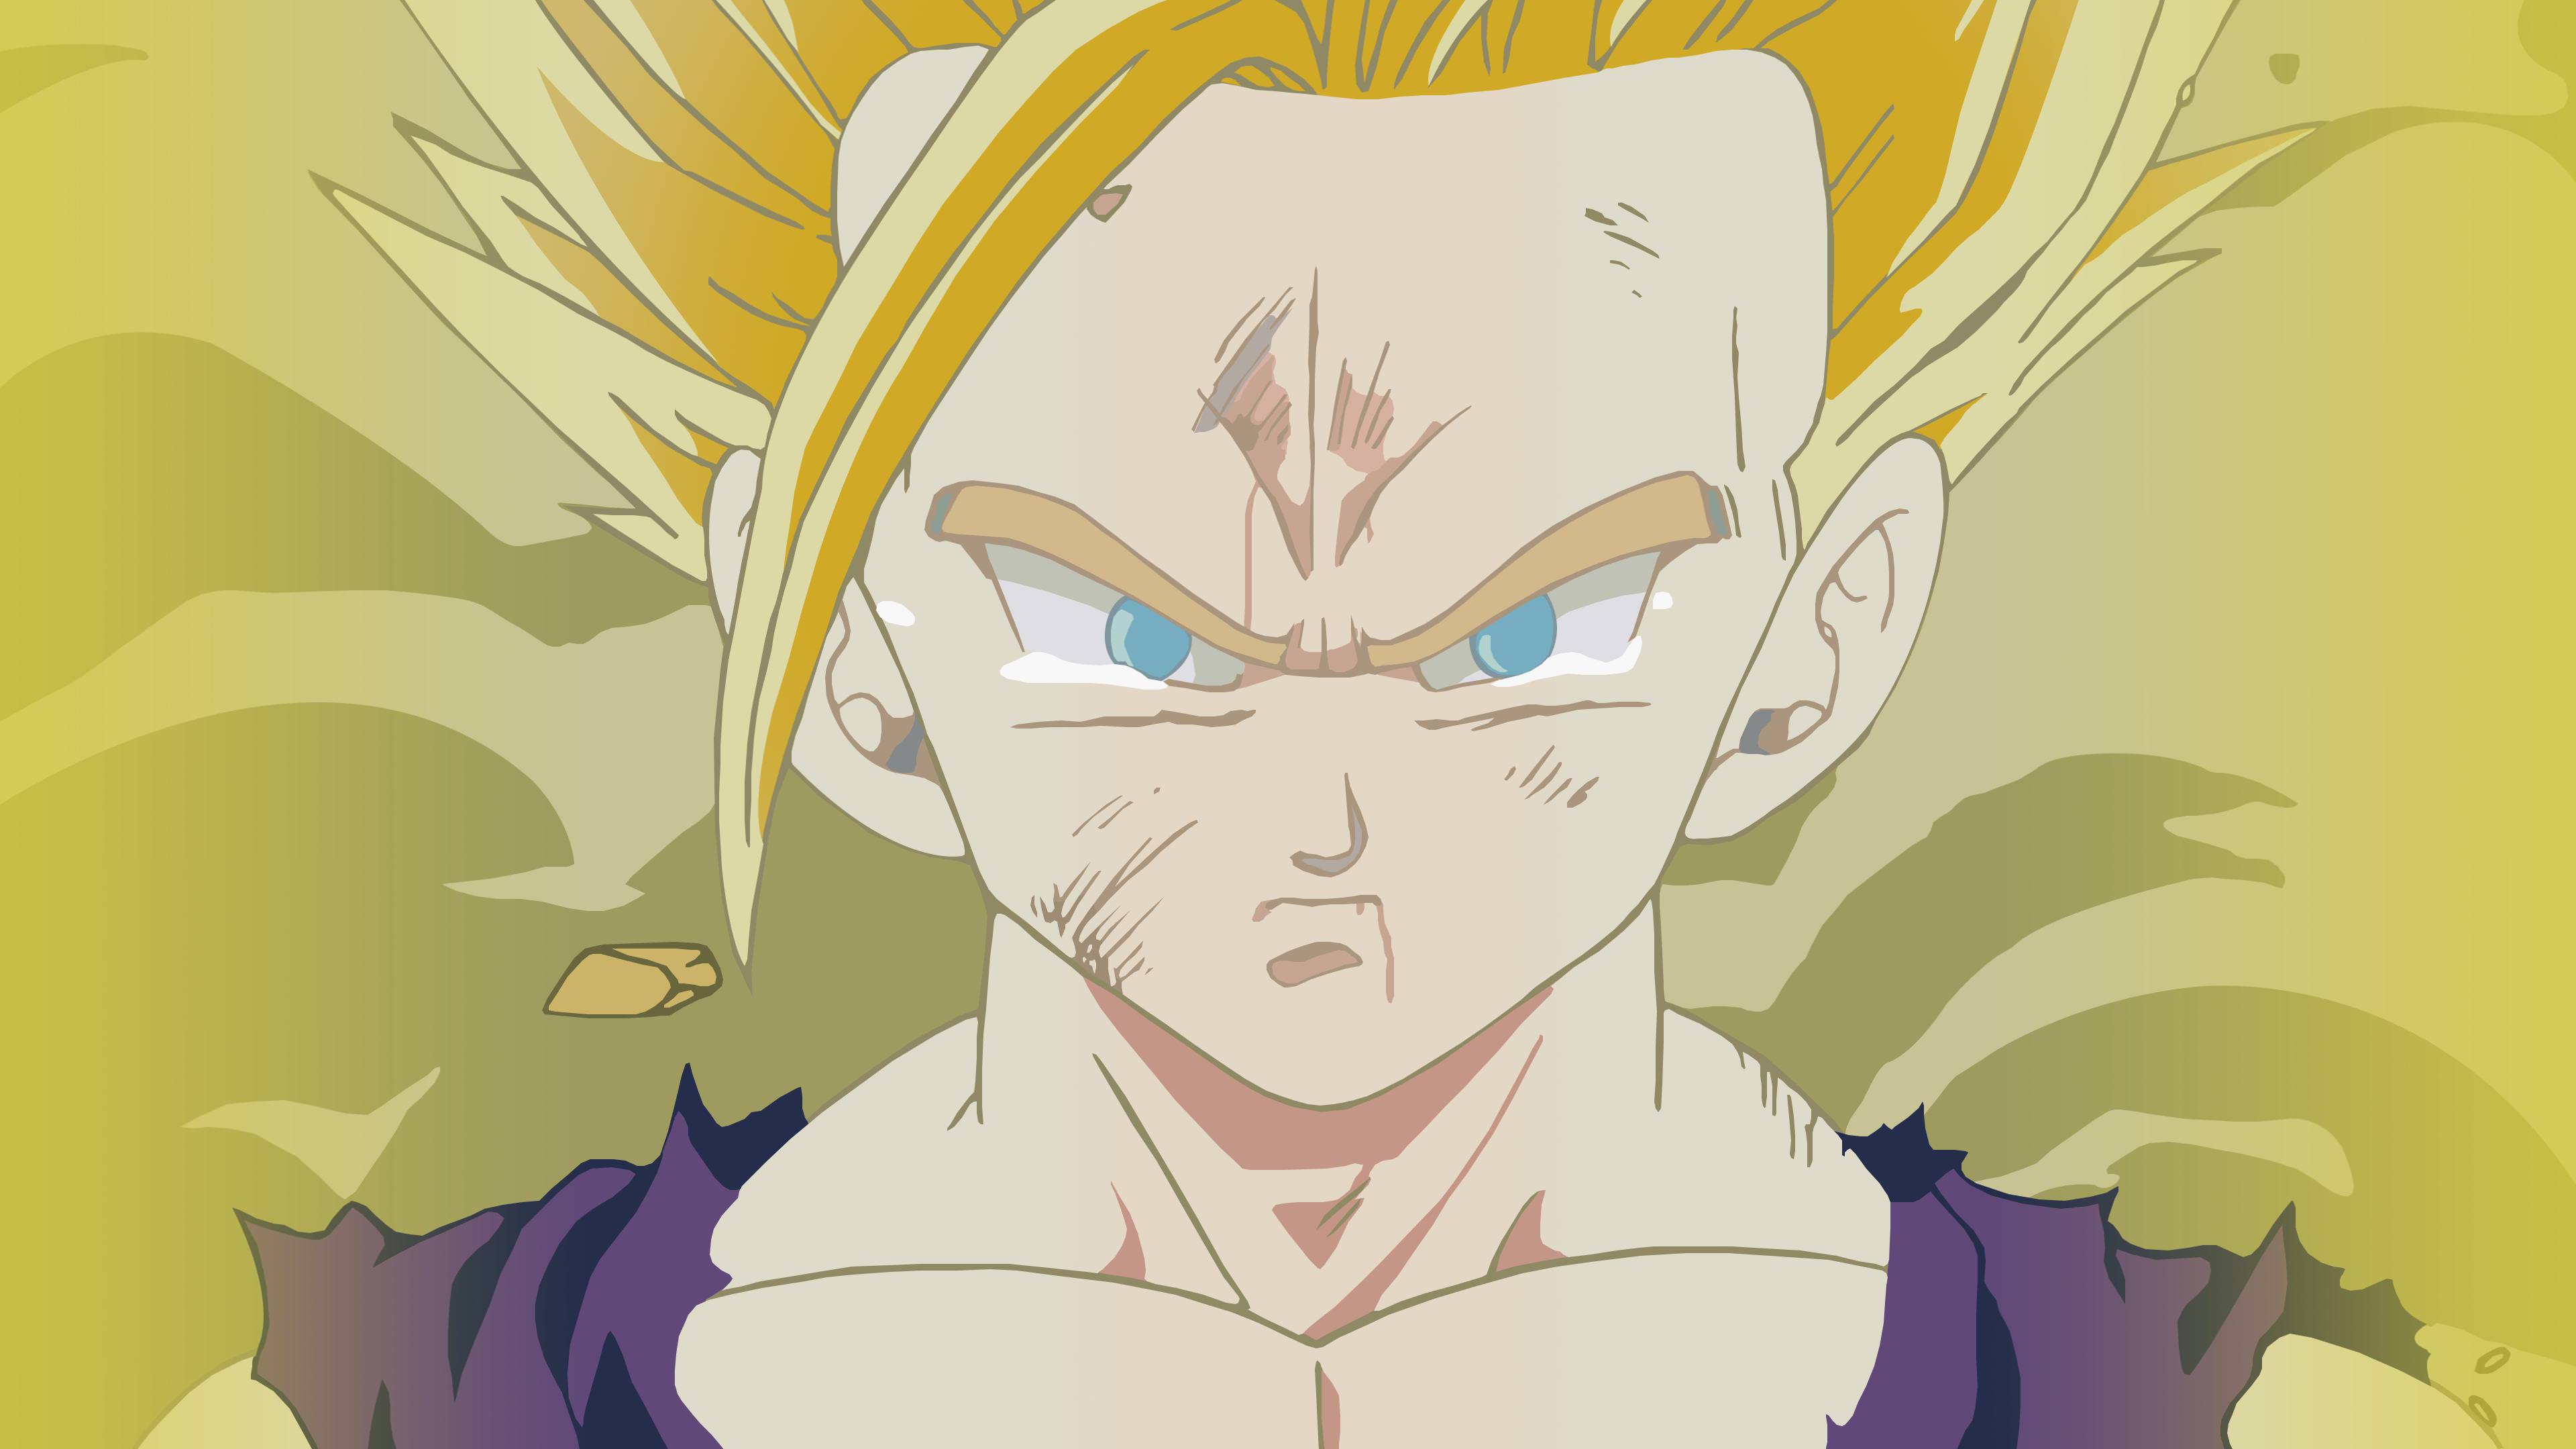 Gohan 4K wallpaper for your desktop or mobile screen free and easy to download